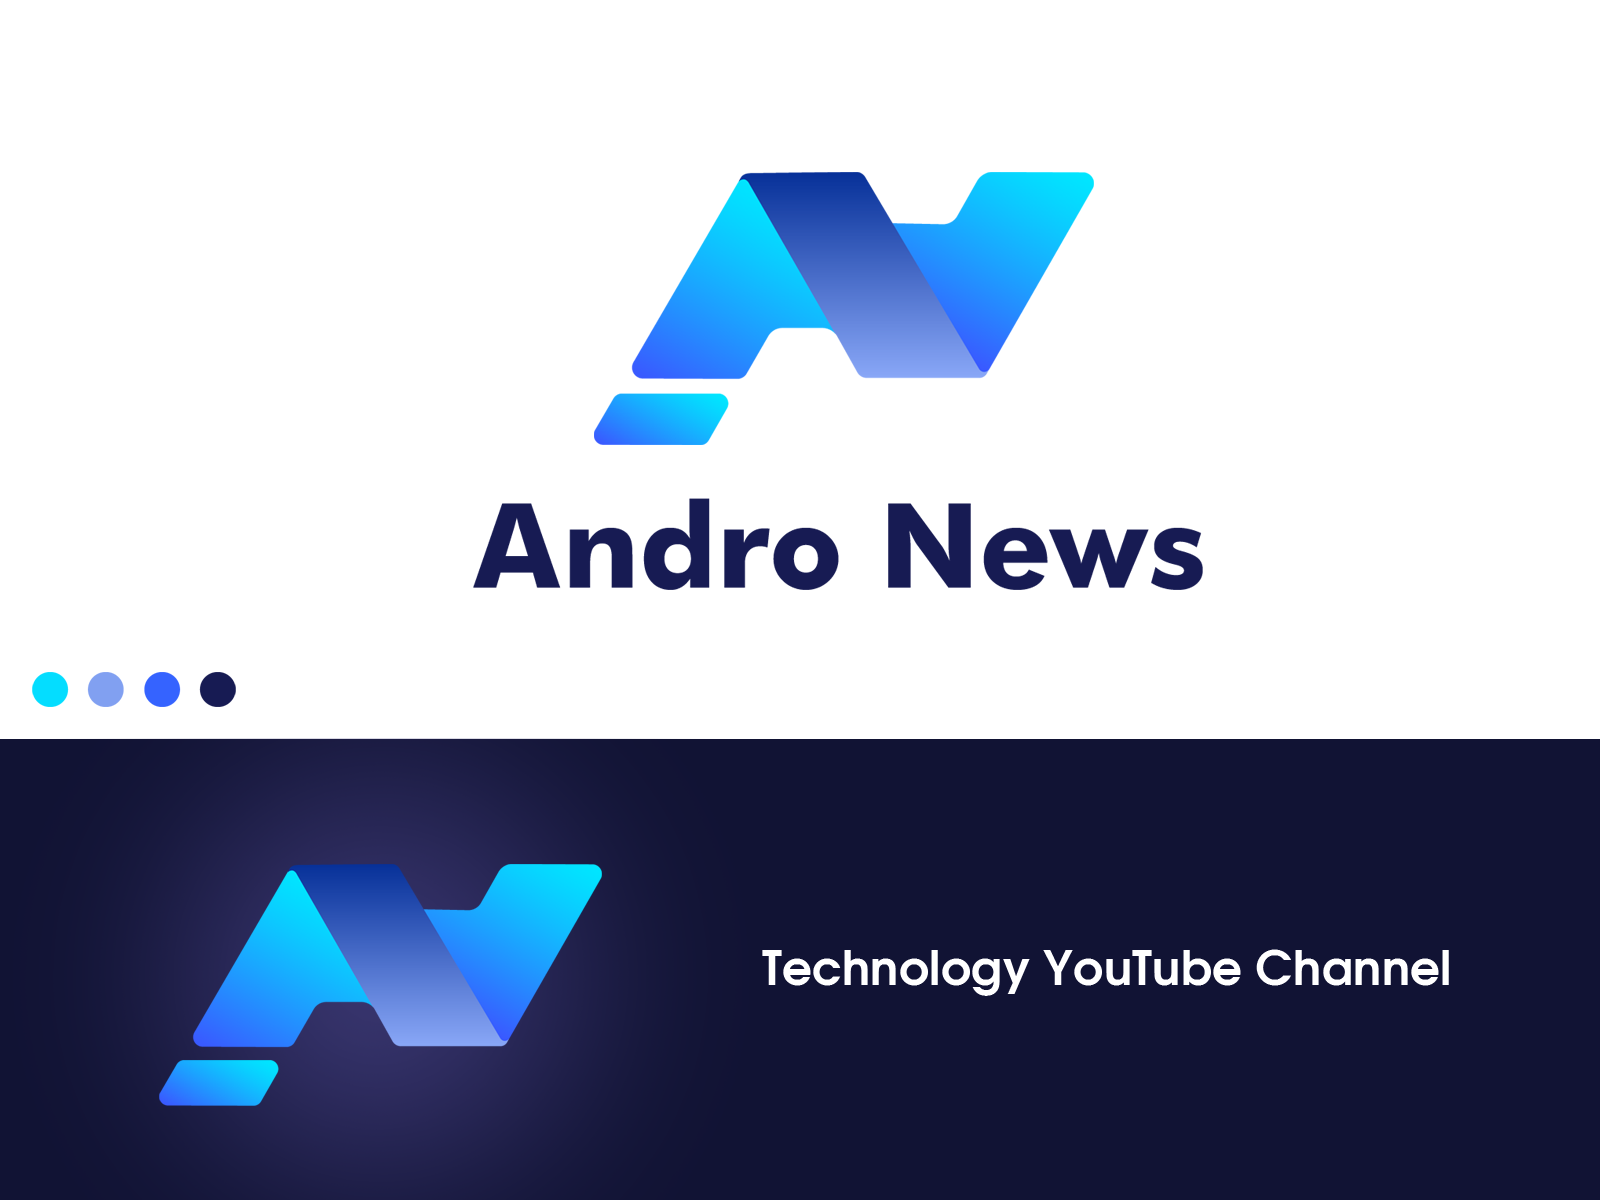 Logo Andro News By Stepan Rudyi On Dribbble